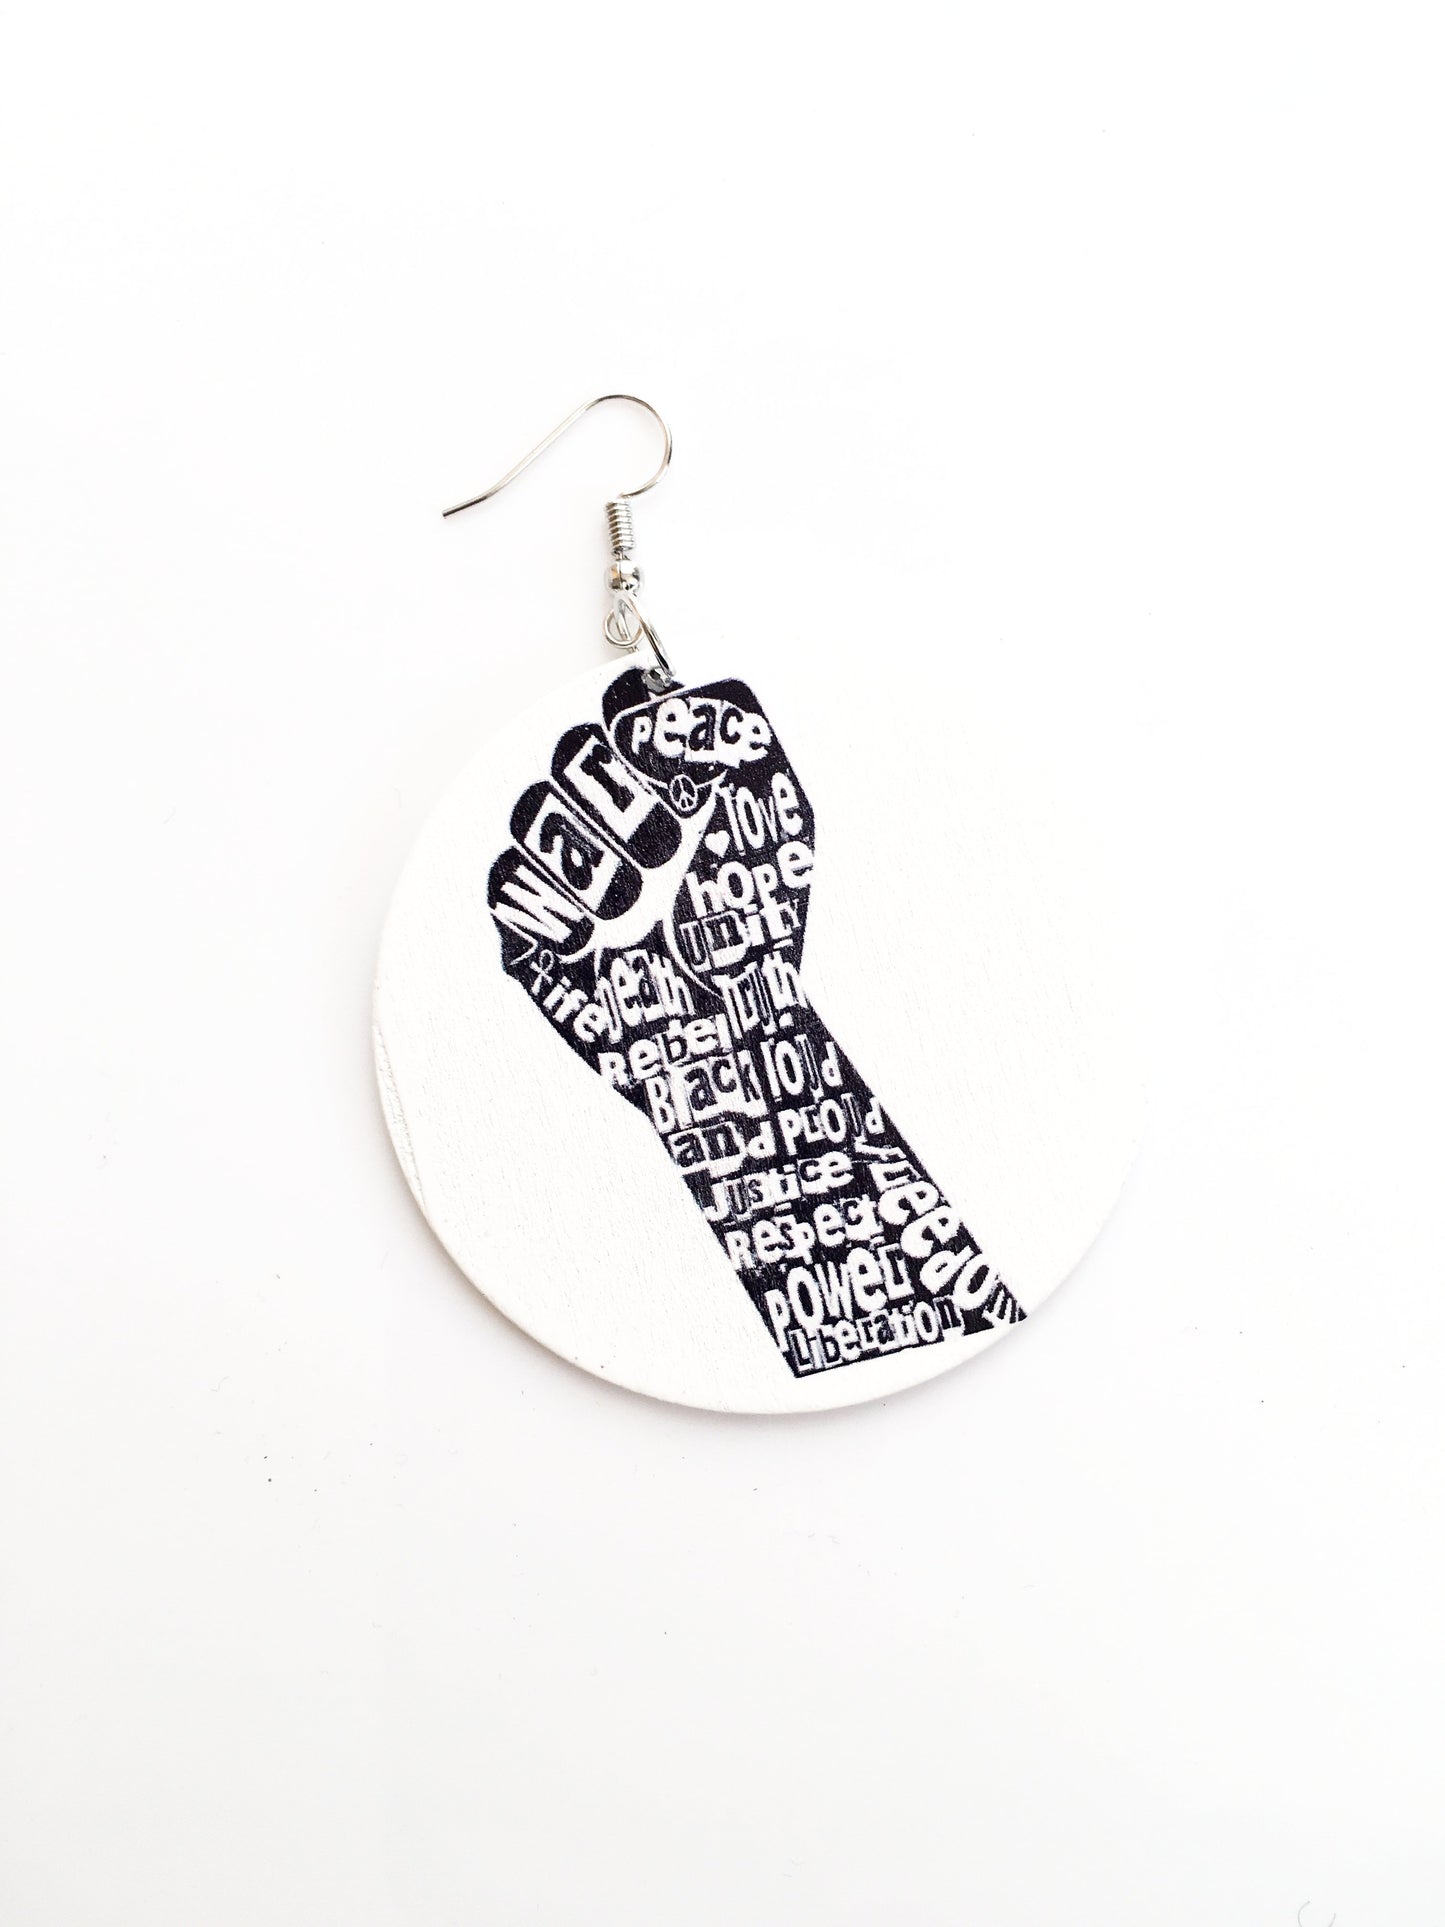 Activism - peace, love, unity and hope wooden earrings